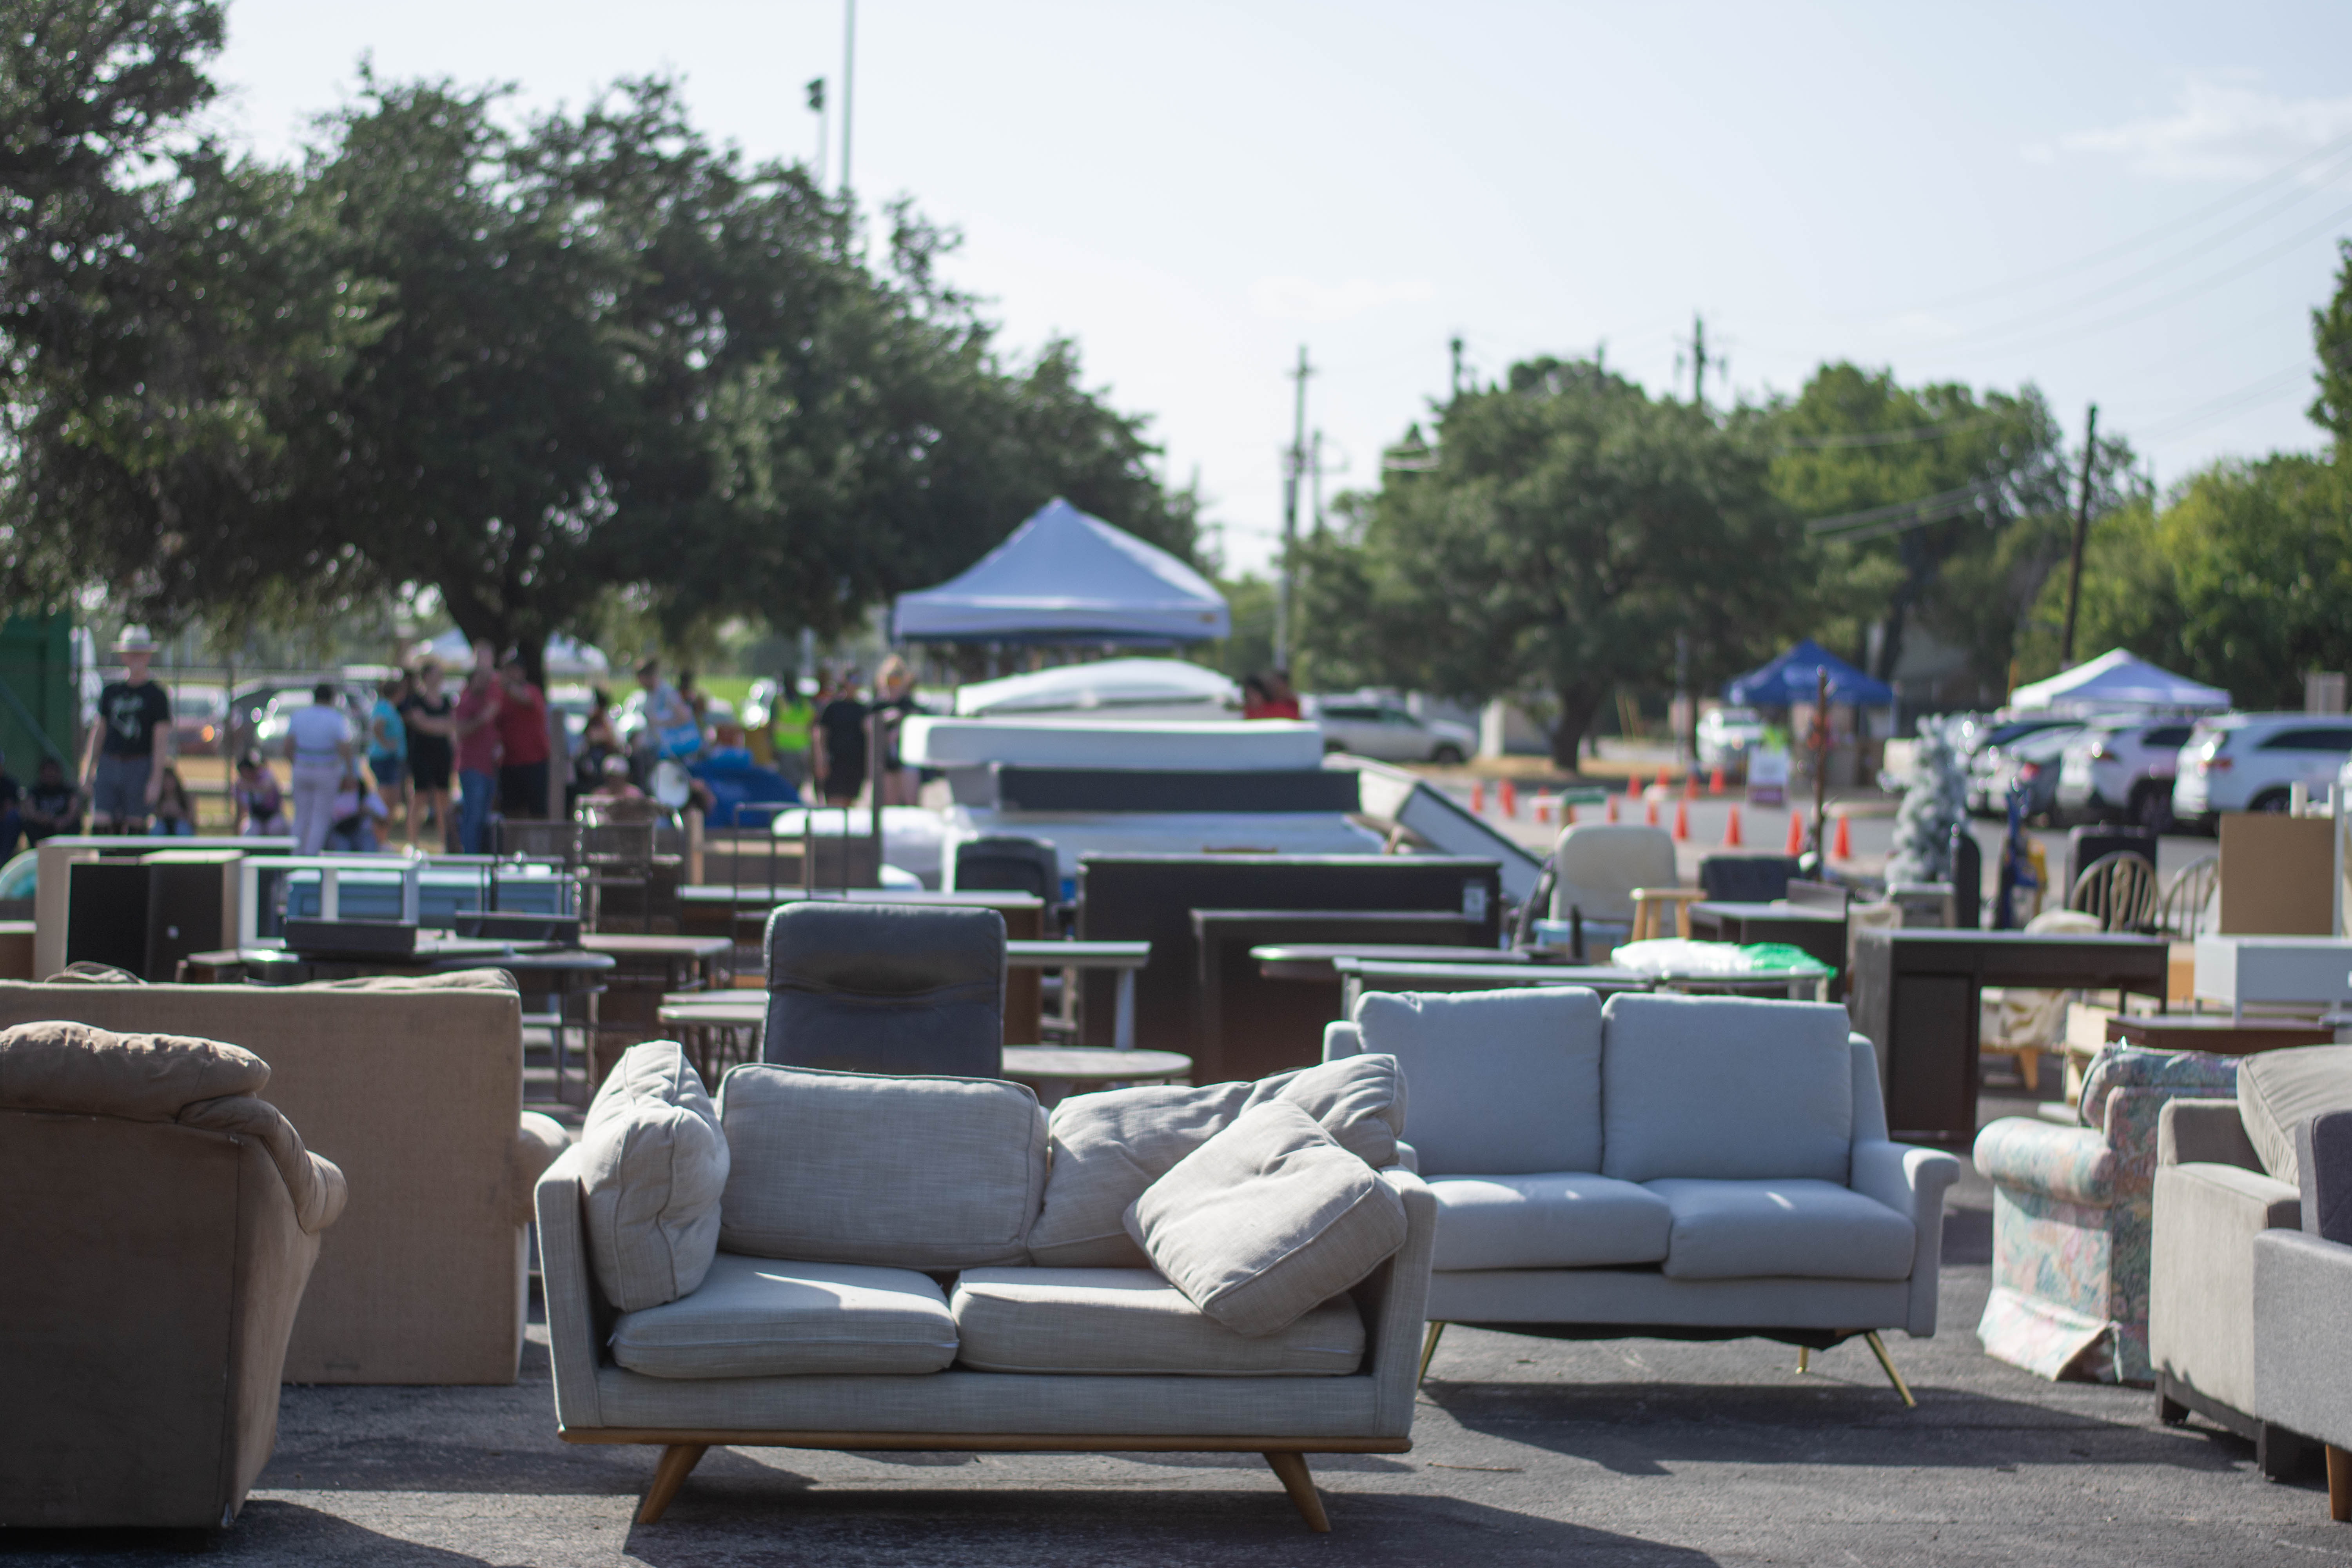 Furniture is set out in a parking lot at MoveOutATX’s Free Furniture Market that was held in July 2023.